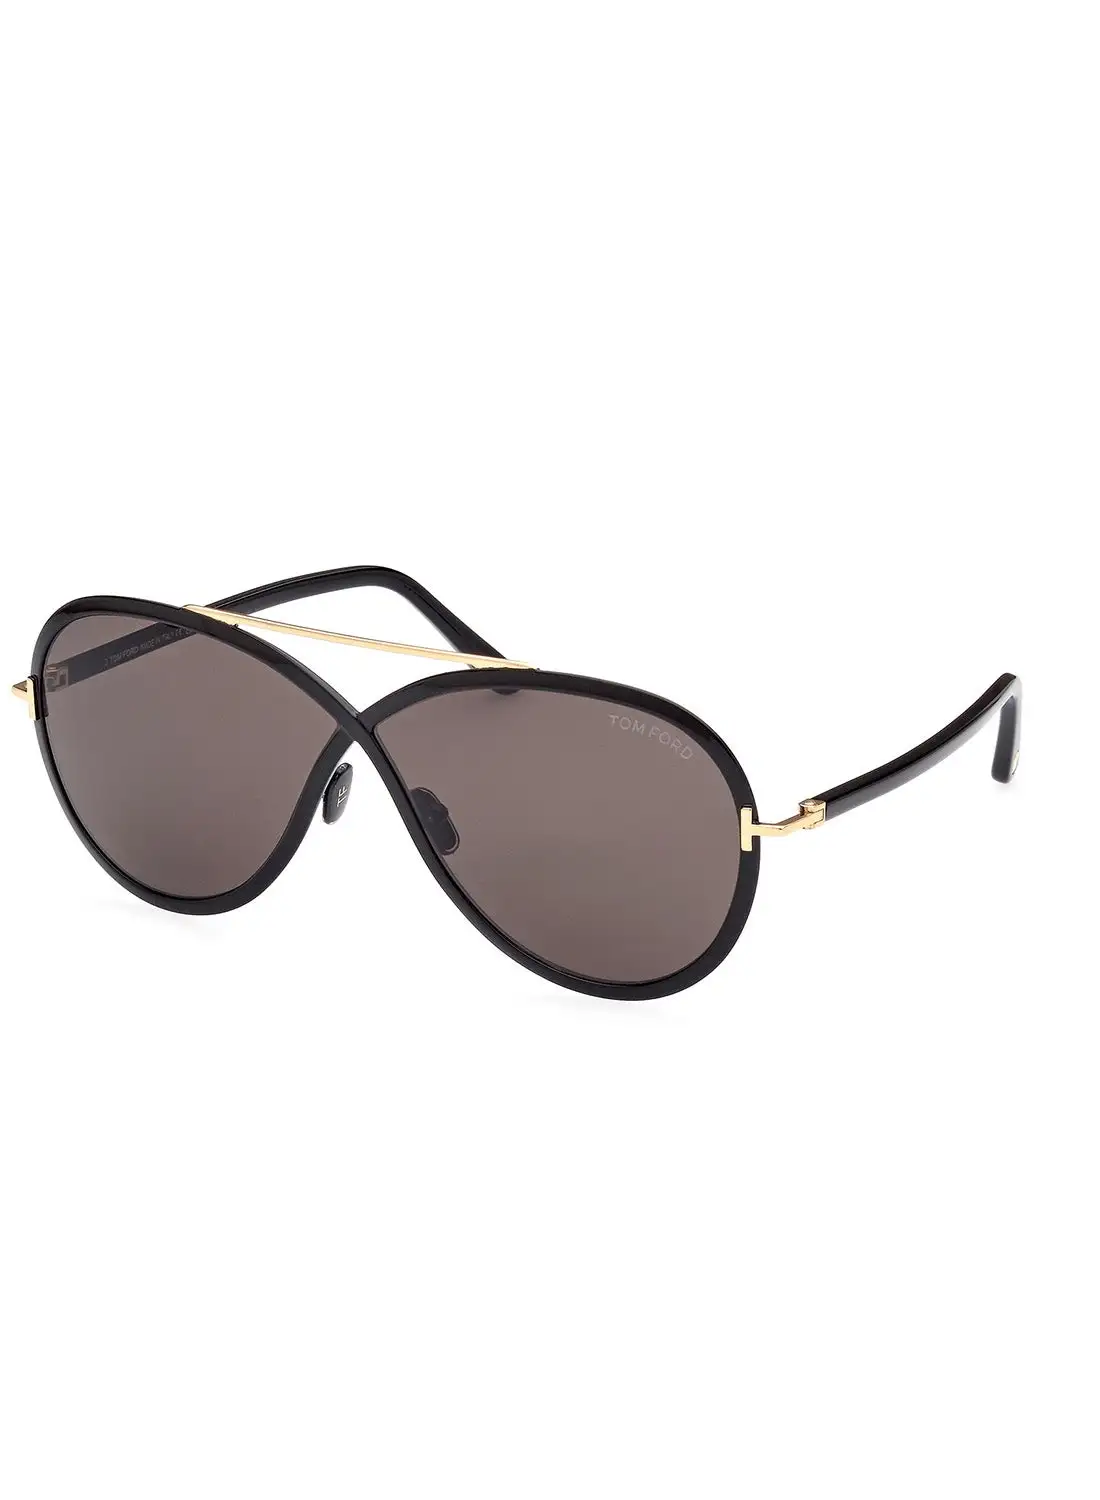 TOM FORD Women's UV Protection Round Sunglasses - FT100701A65 - Lens Size: 65 Mm